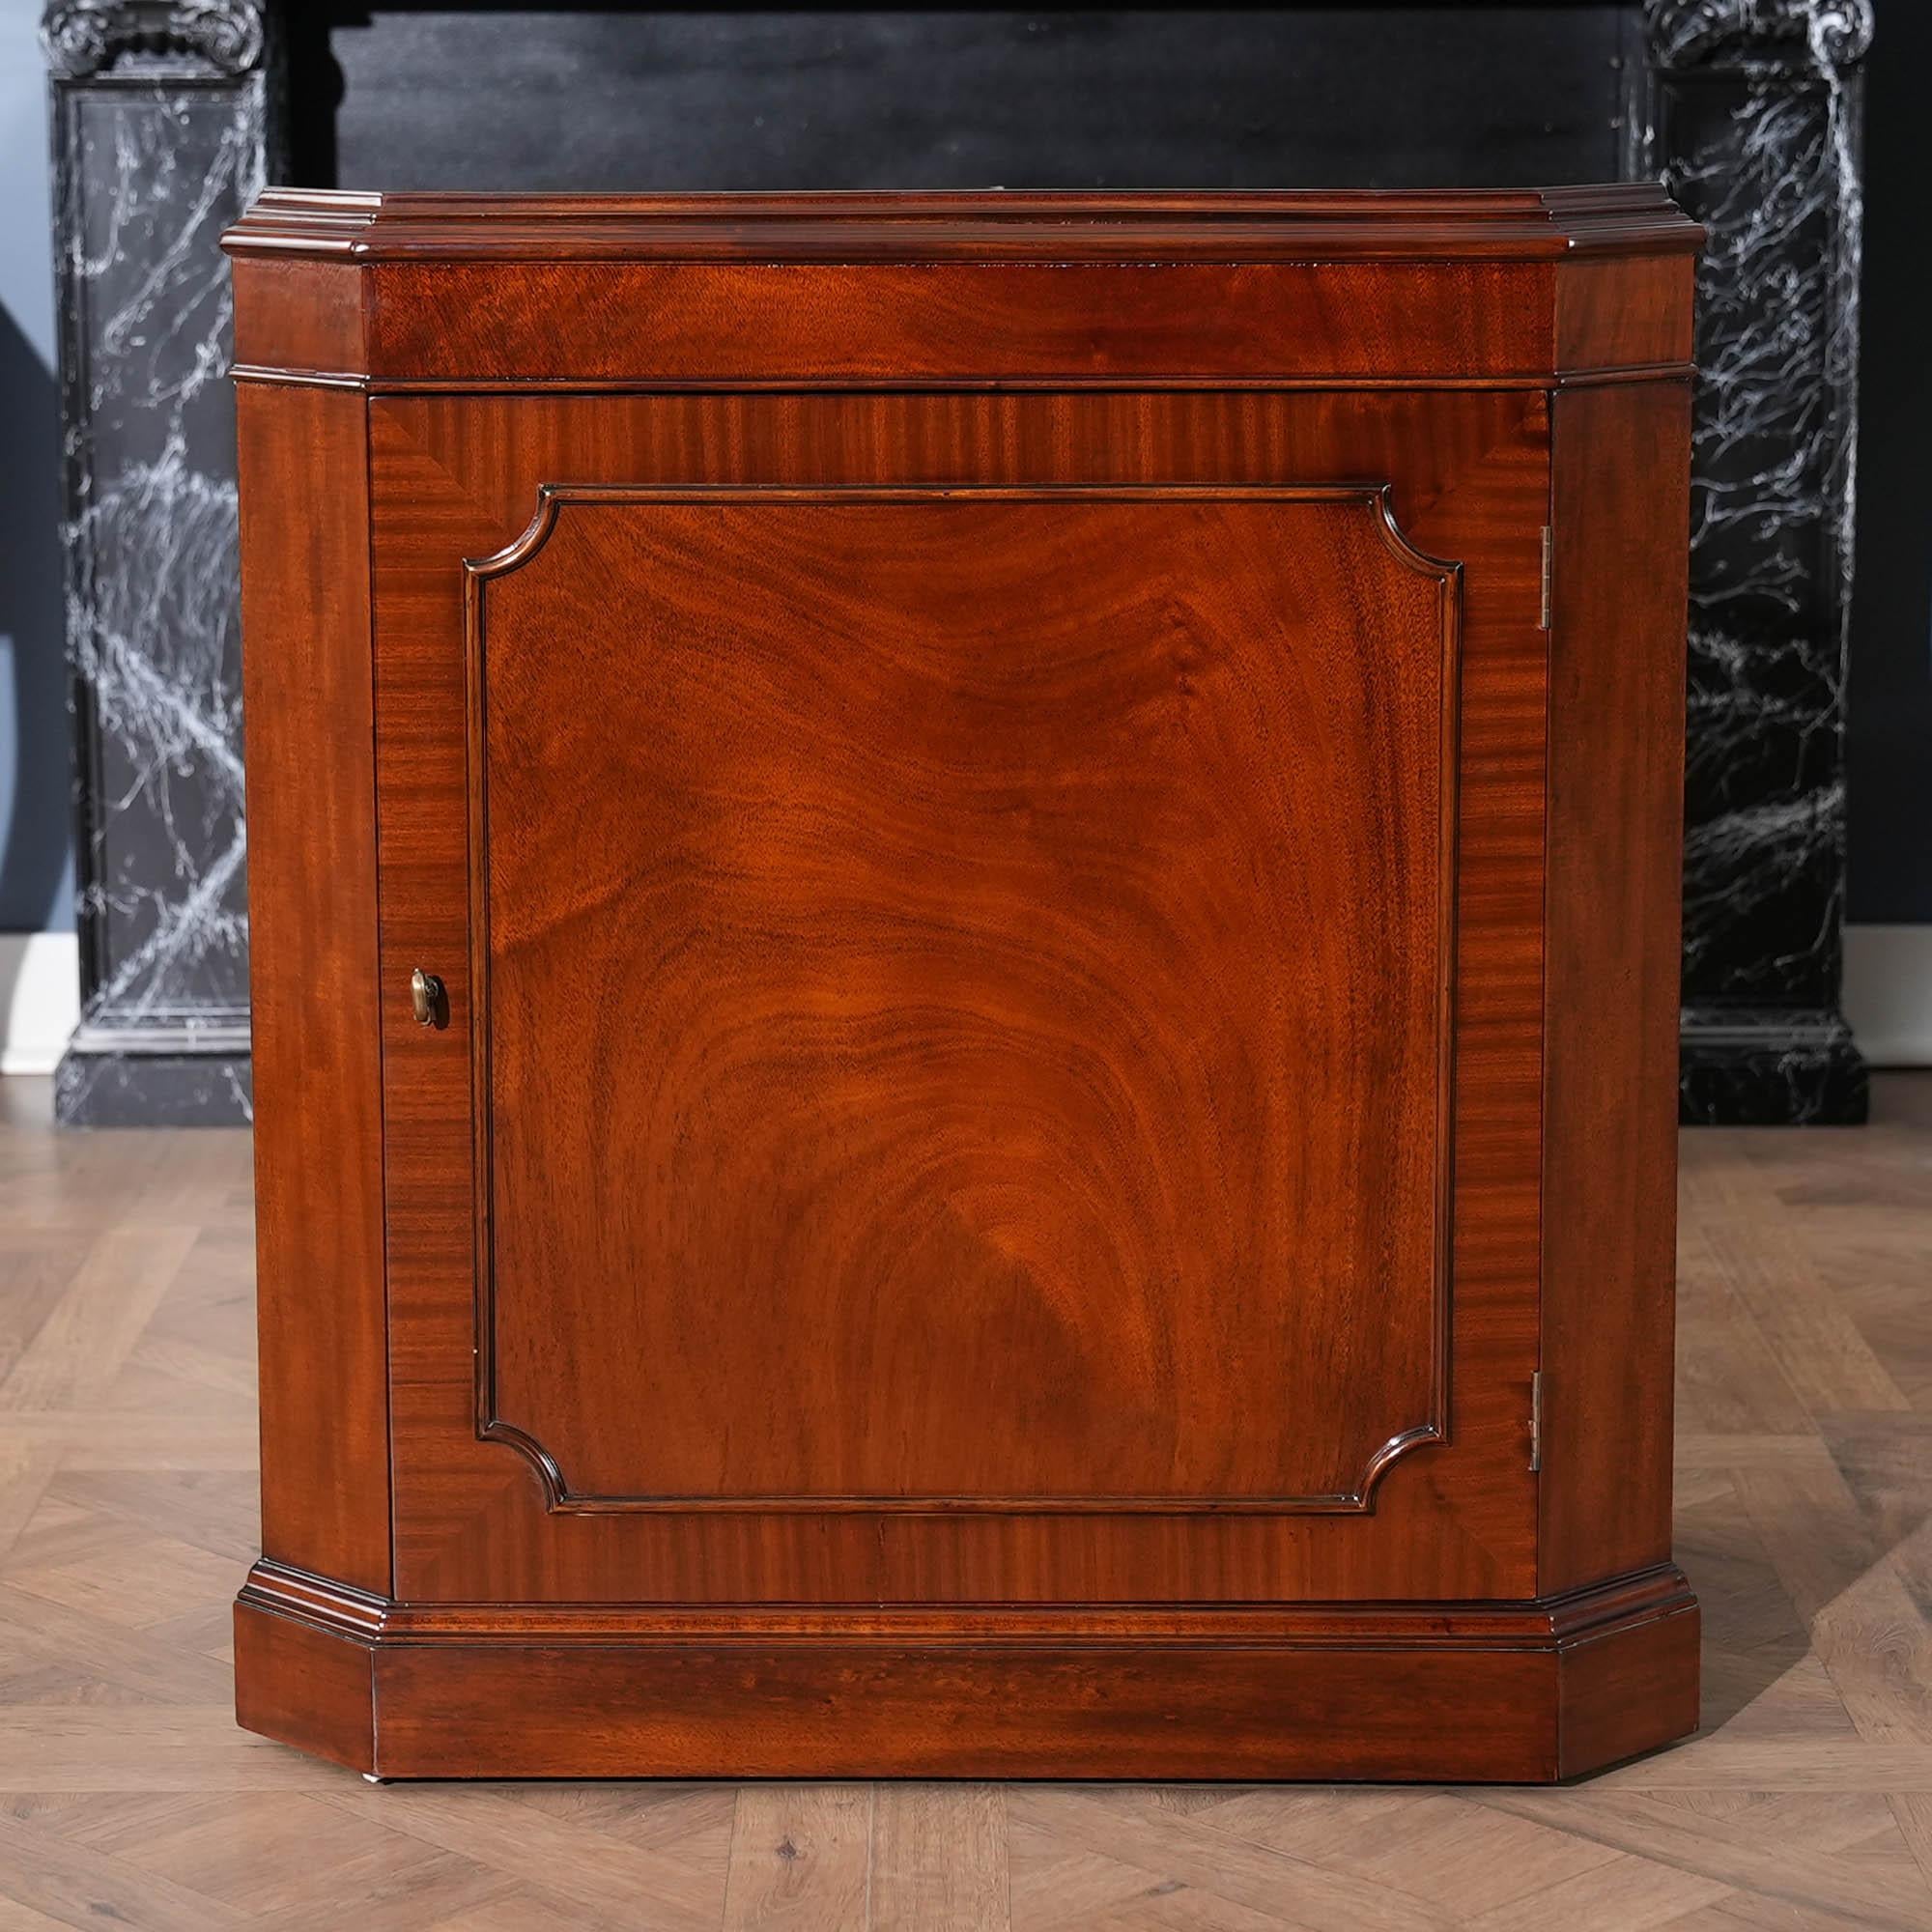 The Mahogany Corner Cabinet. A two part Corner China Closet which can be shipped and installed easily is made from kiln dried, plantation grown mahogany solids and mahogany veneers. Our corner china features a broken arch, swan neck pediment on the